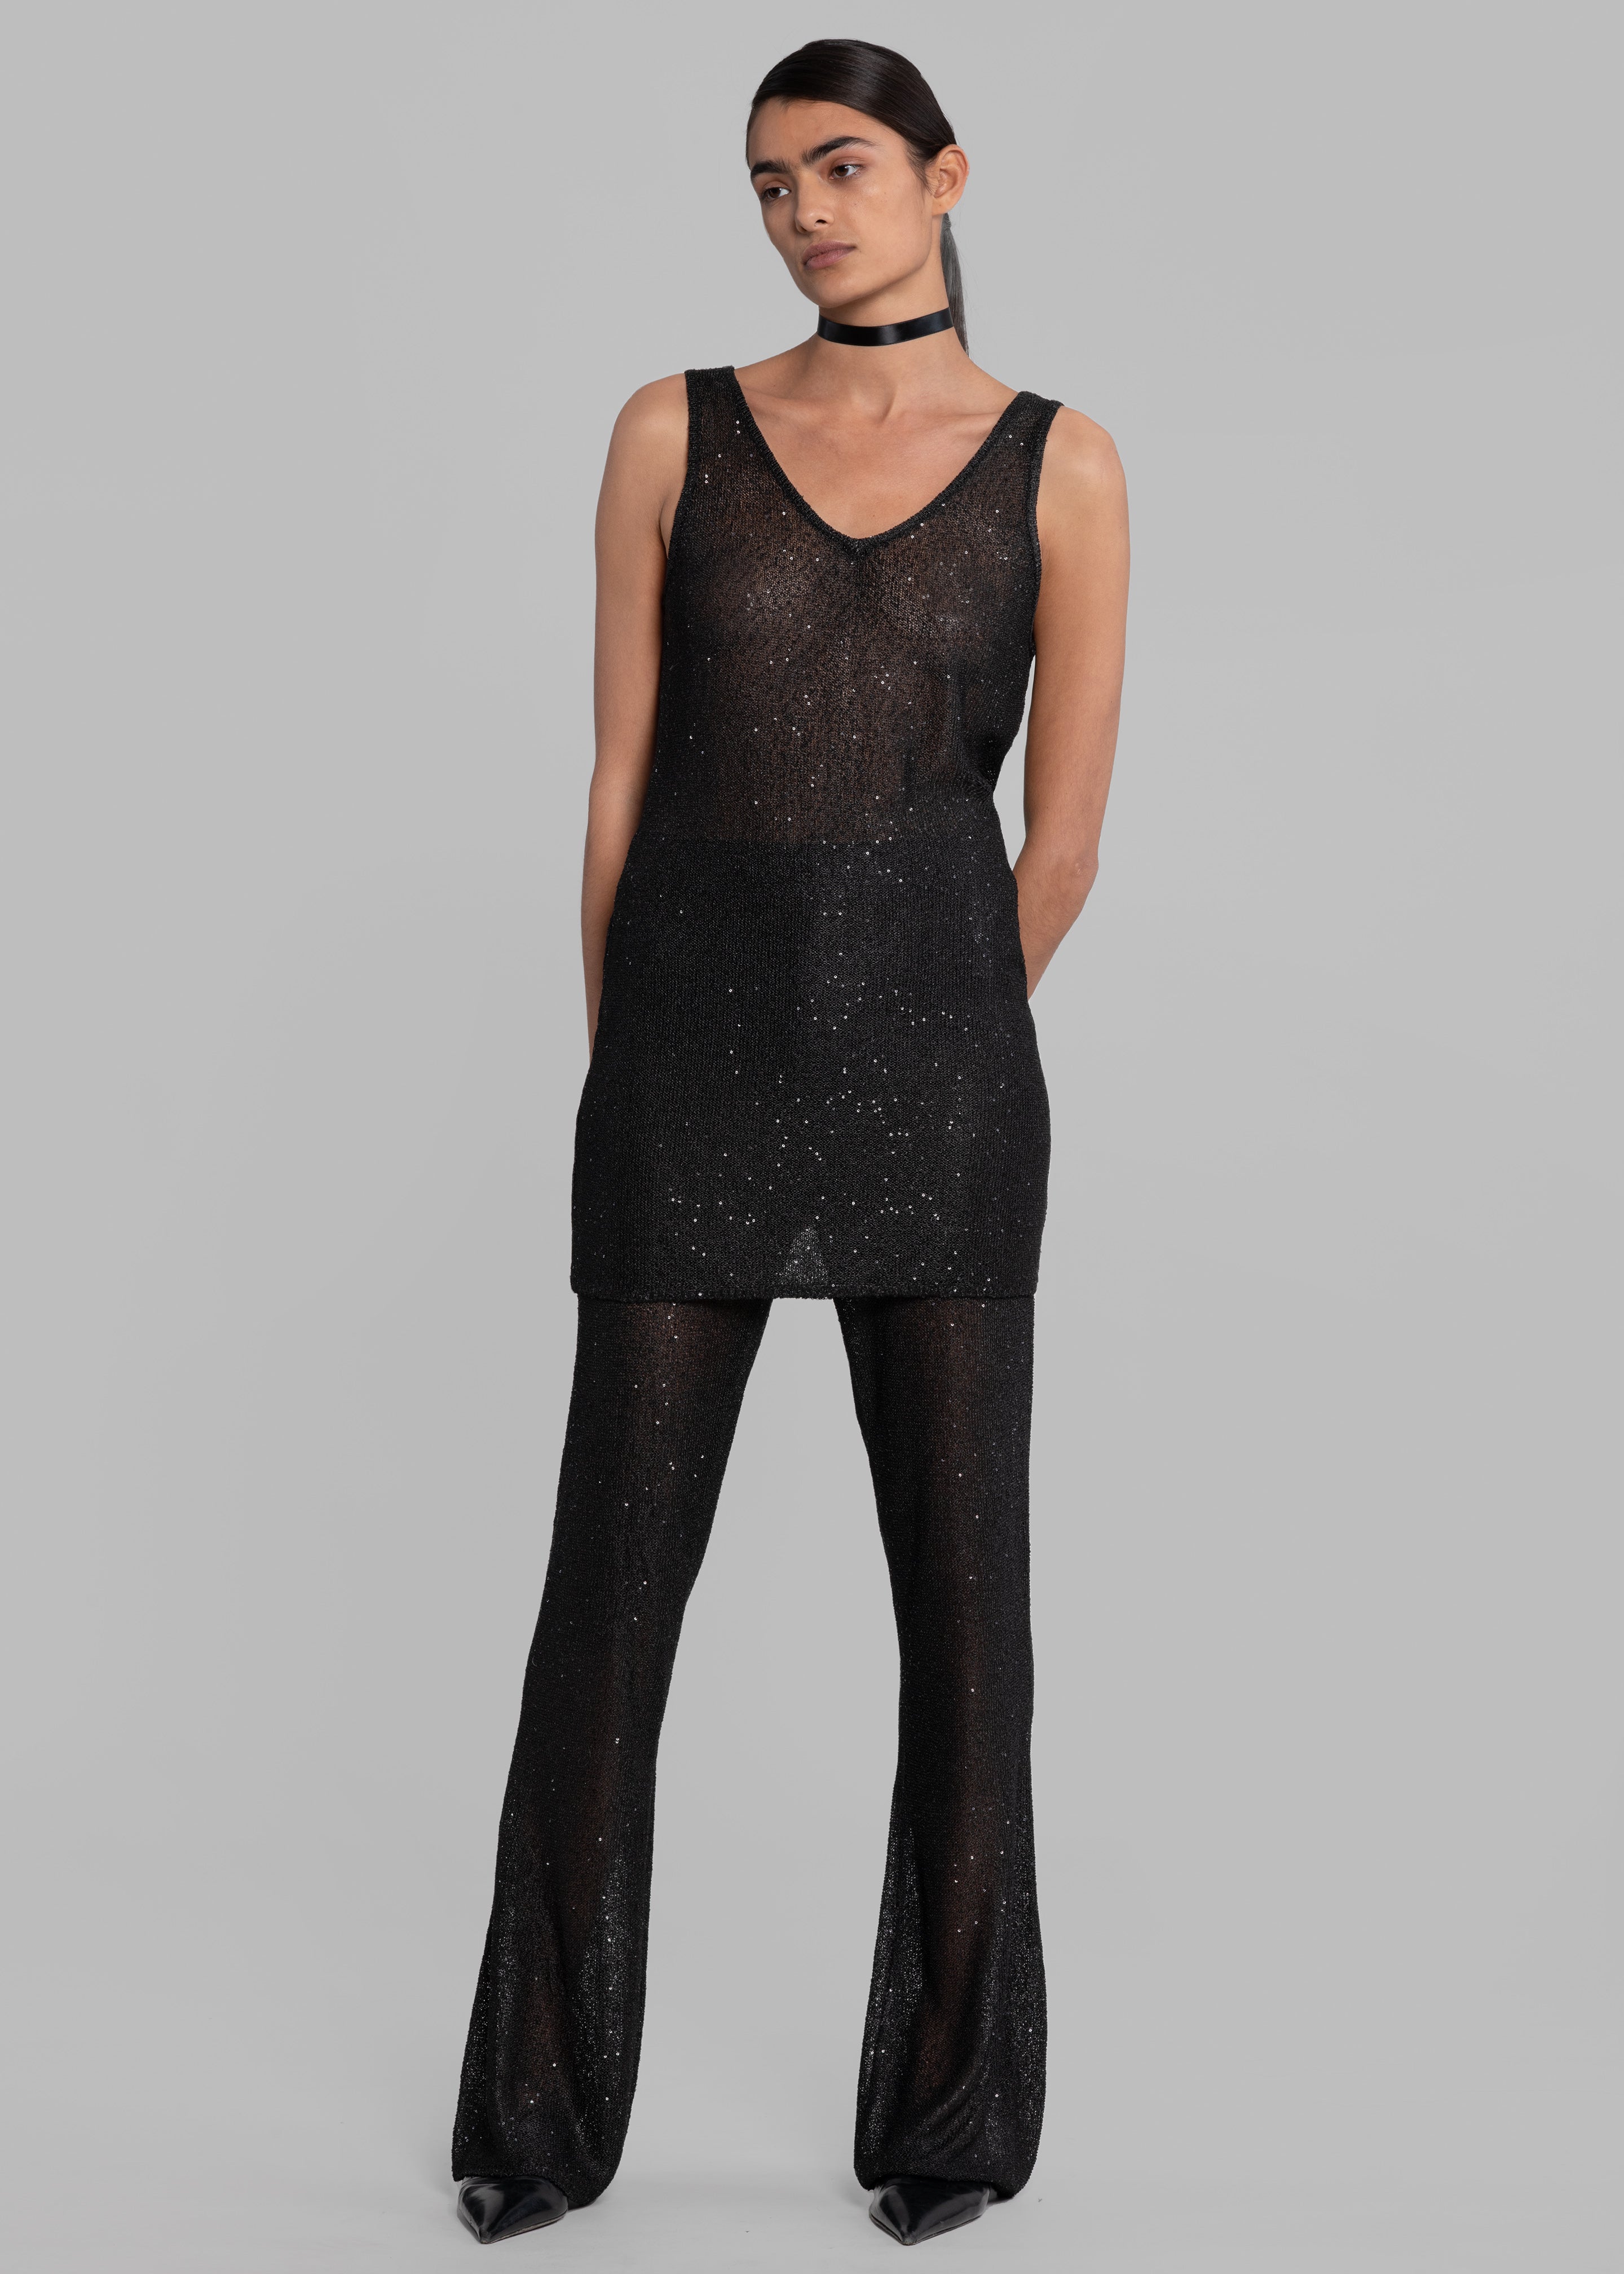 REMAIN Sequin Knit Fitted Flared Pants - Black - 5